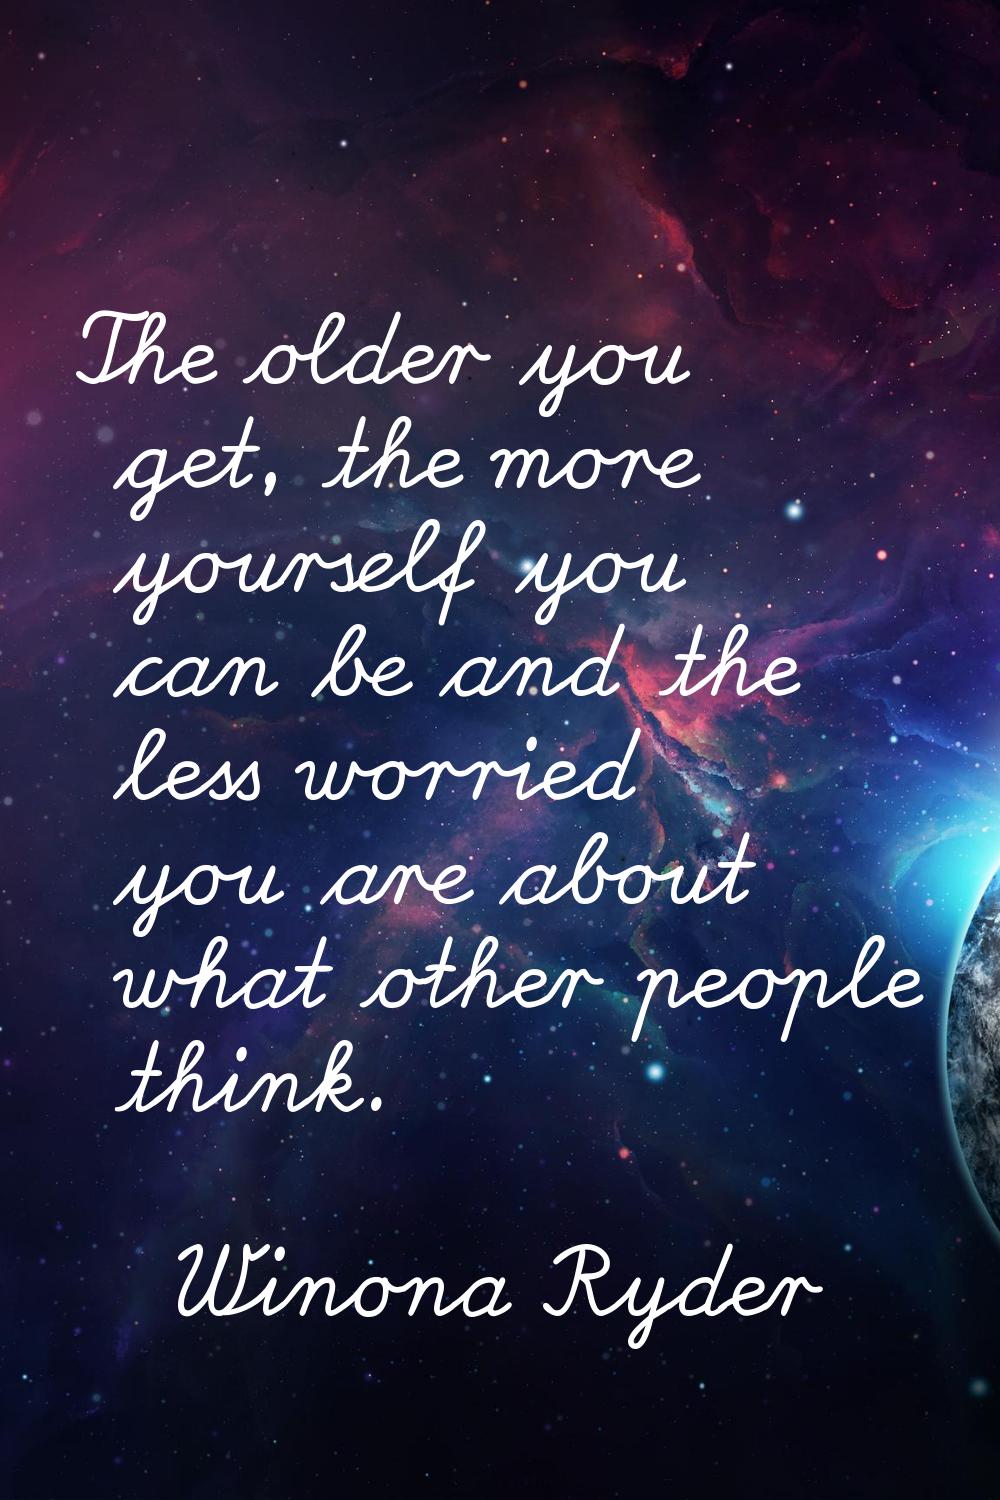 The older you get, the more yourself you can be and the less worried you are about what other peopl